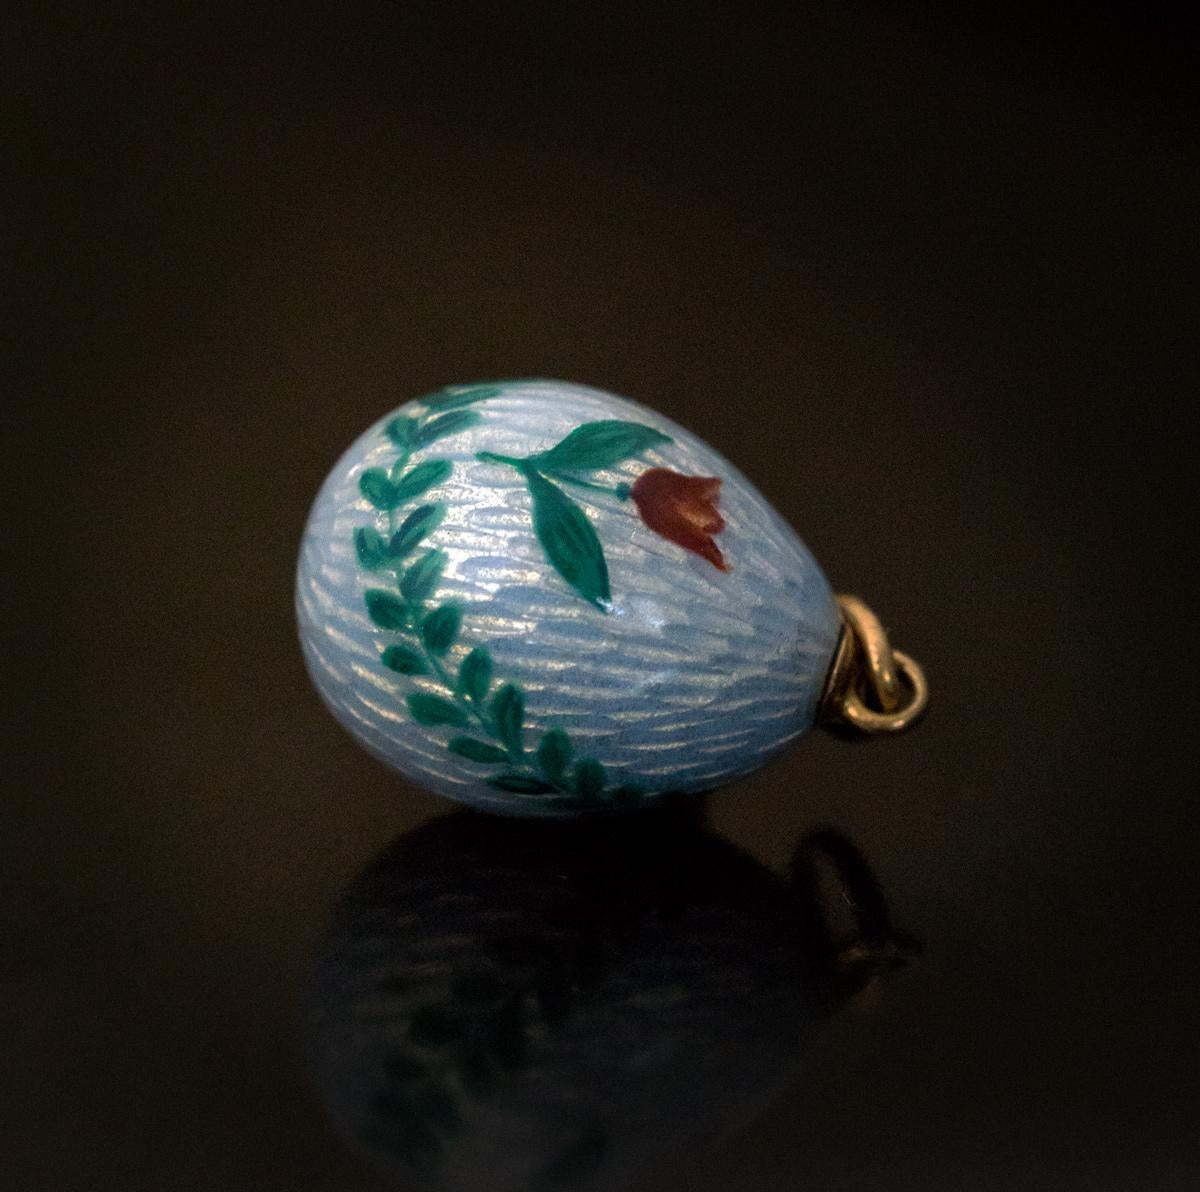 Made between 1908 and 1917.

A charming antique Russian pale blue guilloche enamel egg pendant is painted with two red tulips and a green leaf garland. The egg is marked on suspension ring with 56 zolotnik old Russian gold standard and maker’s